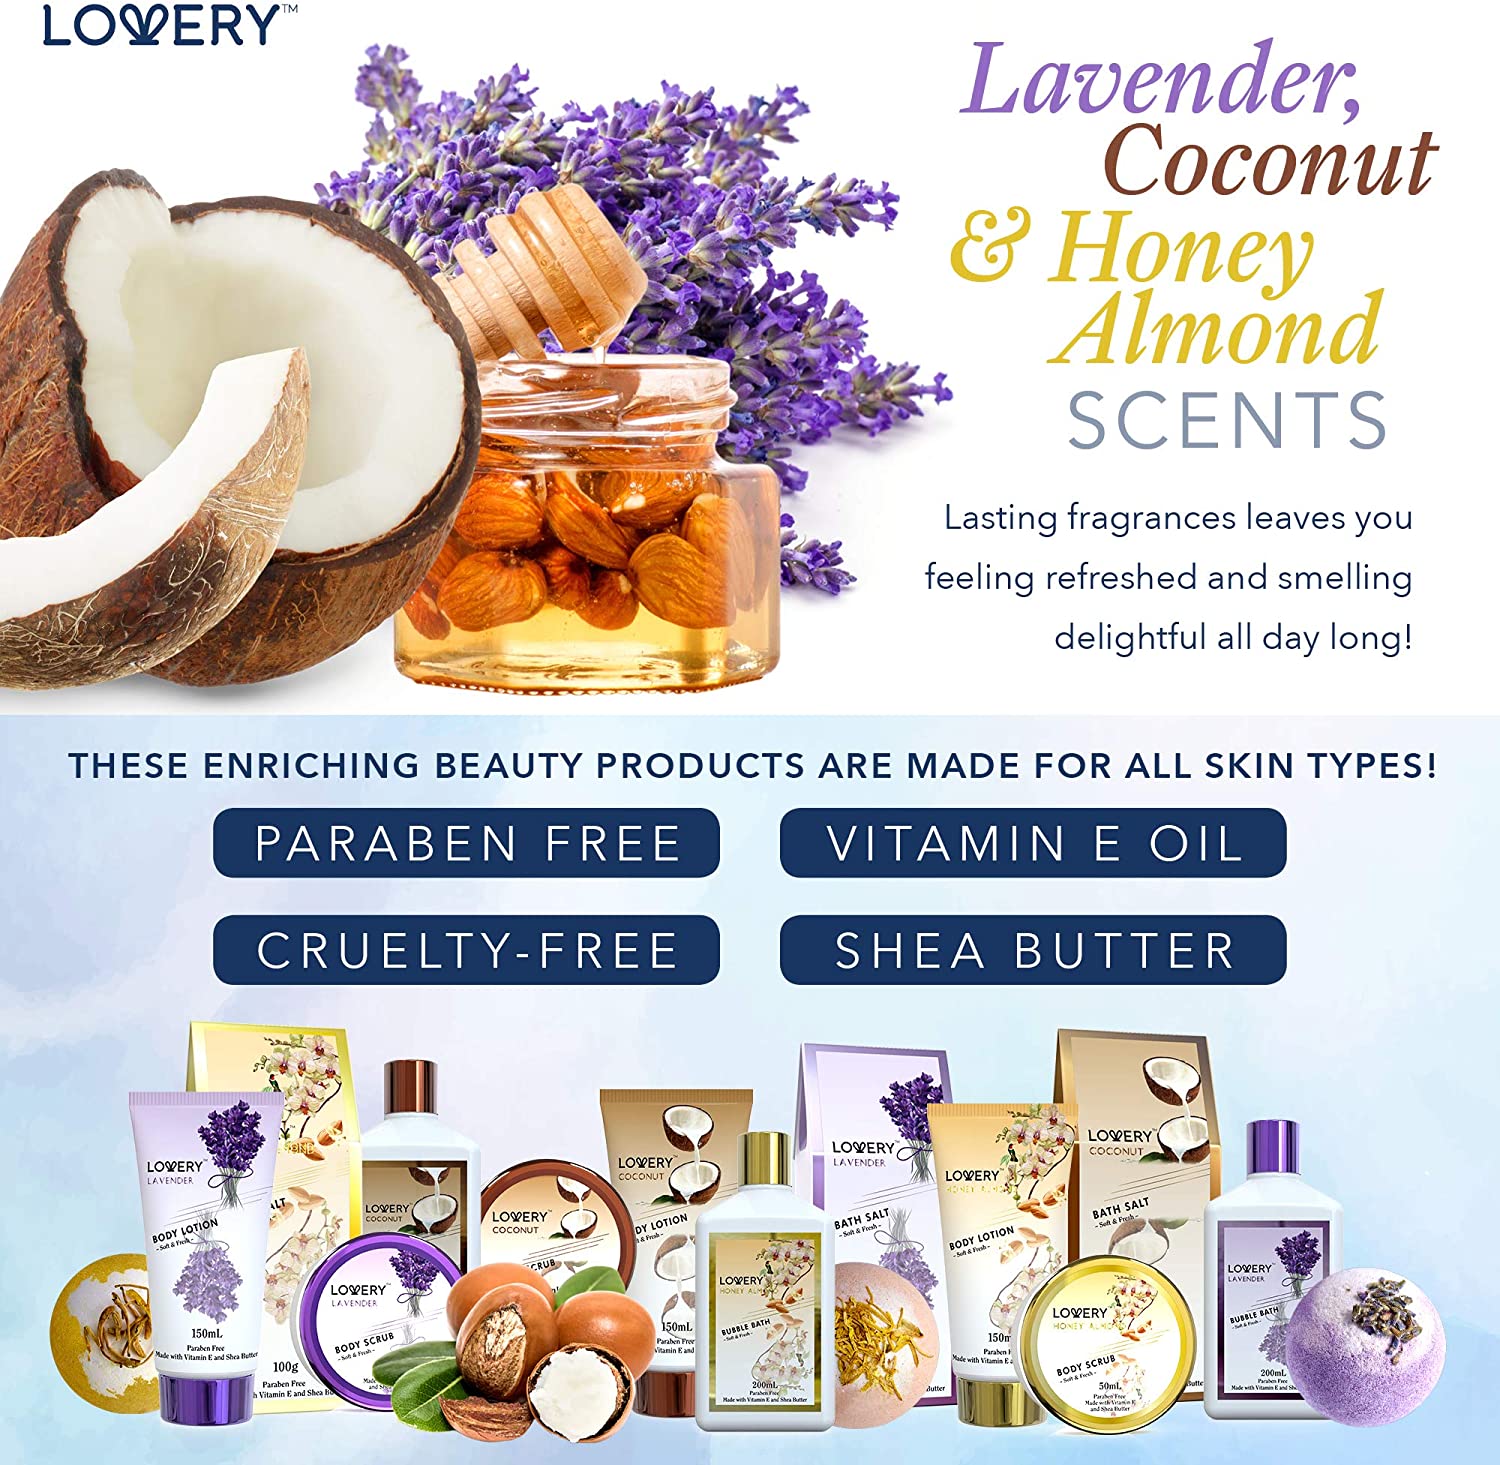 spa kit, lavender lotion, coconut lotion, honey almond lotion, almond lotion, honey lotion, lovery body lotion, lavender body lotion, coconut body lotion, lovery gift baskets, lovery, lovery beauty sets, lovery paraben free